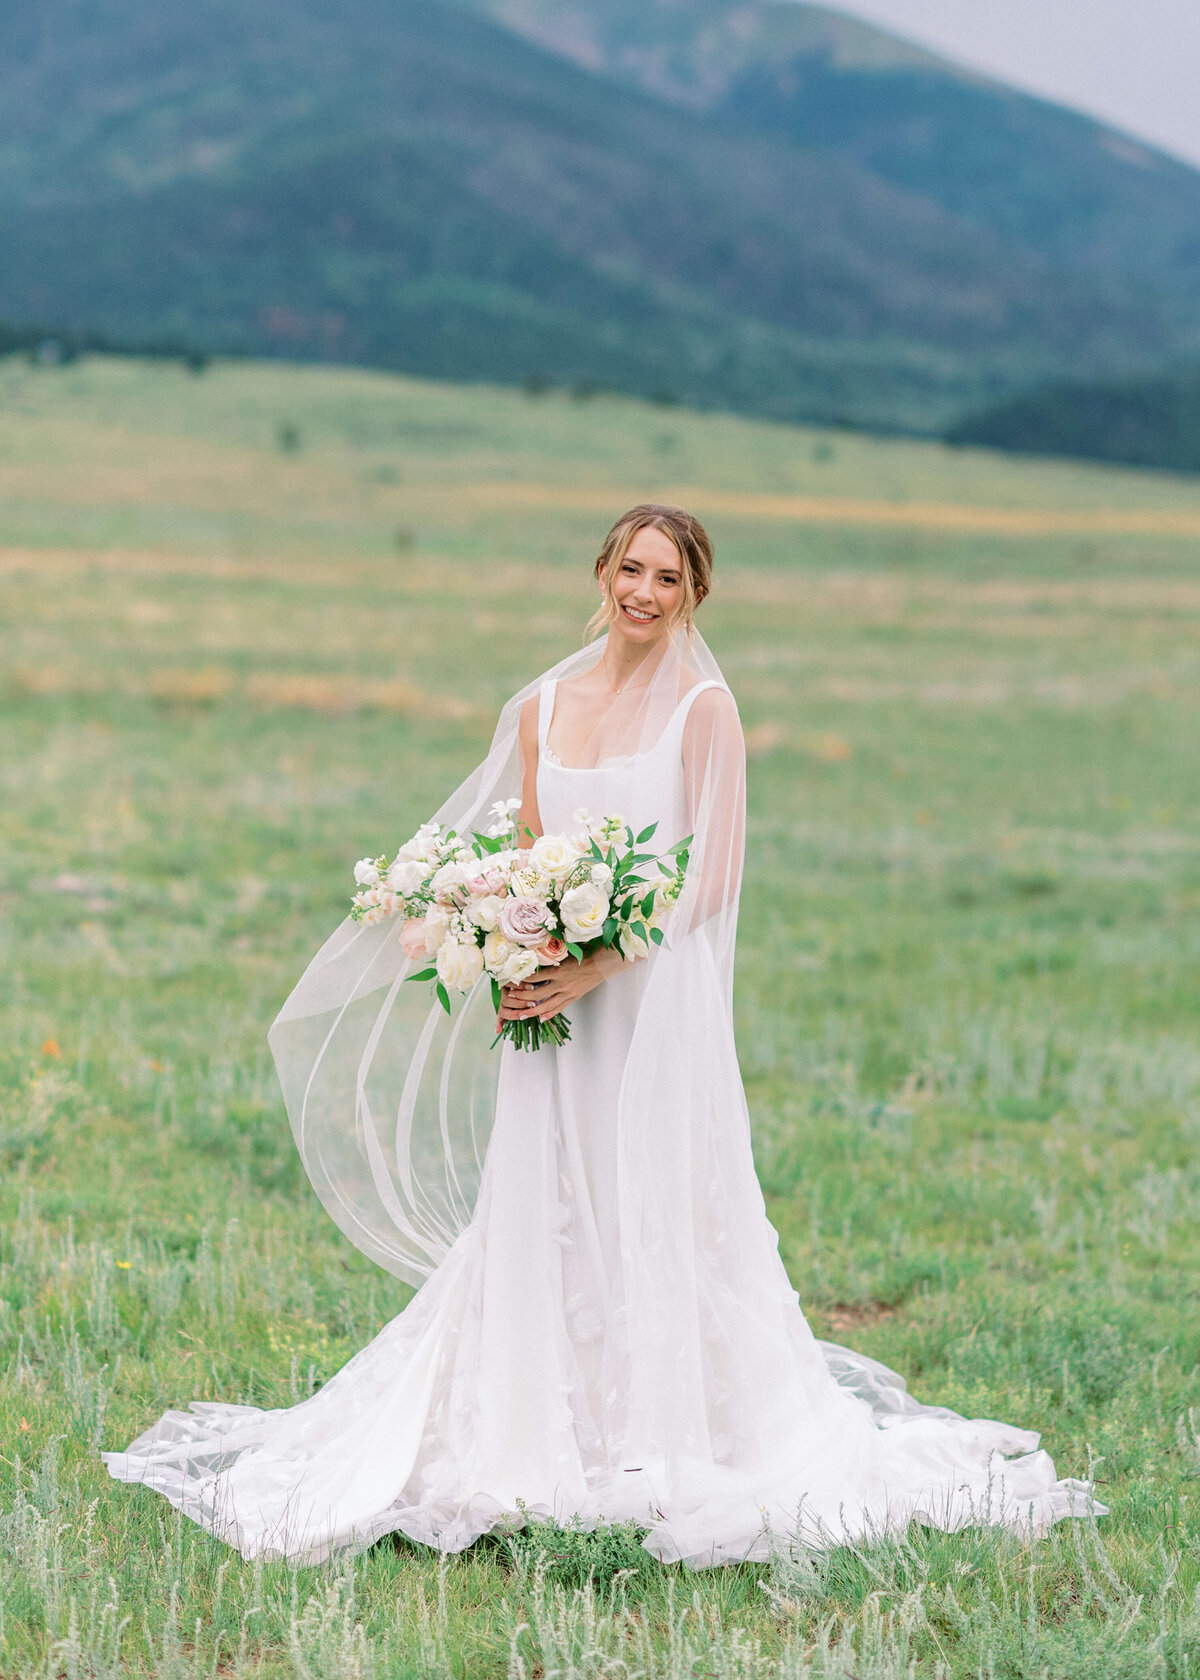 beautiful bride in a flowing white dress smiles at the camera while the wind blows her delicate veil around her shoulders